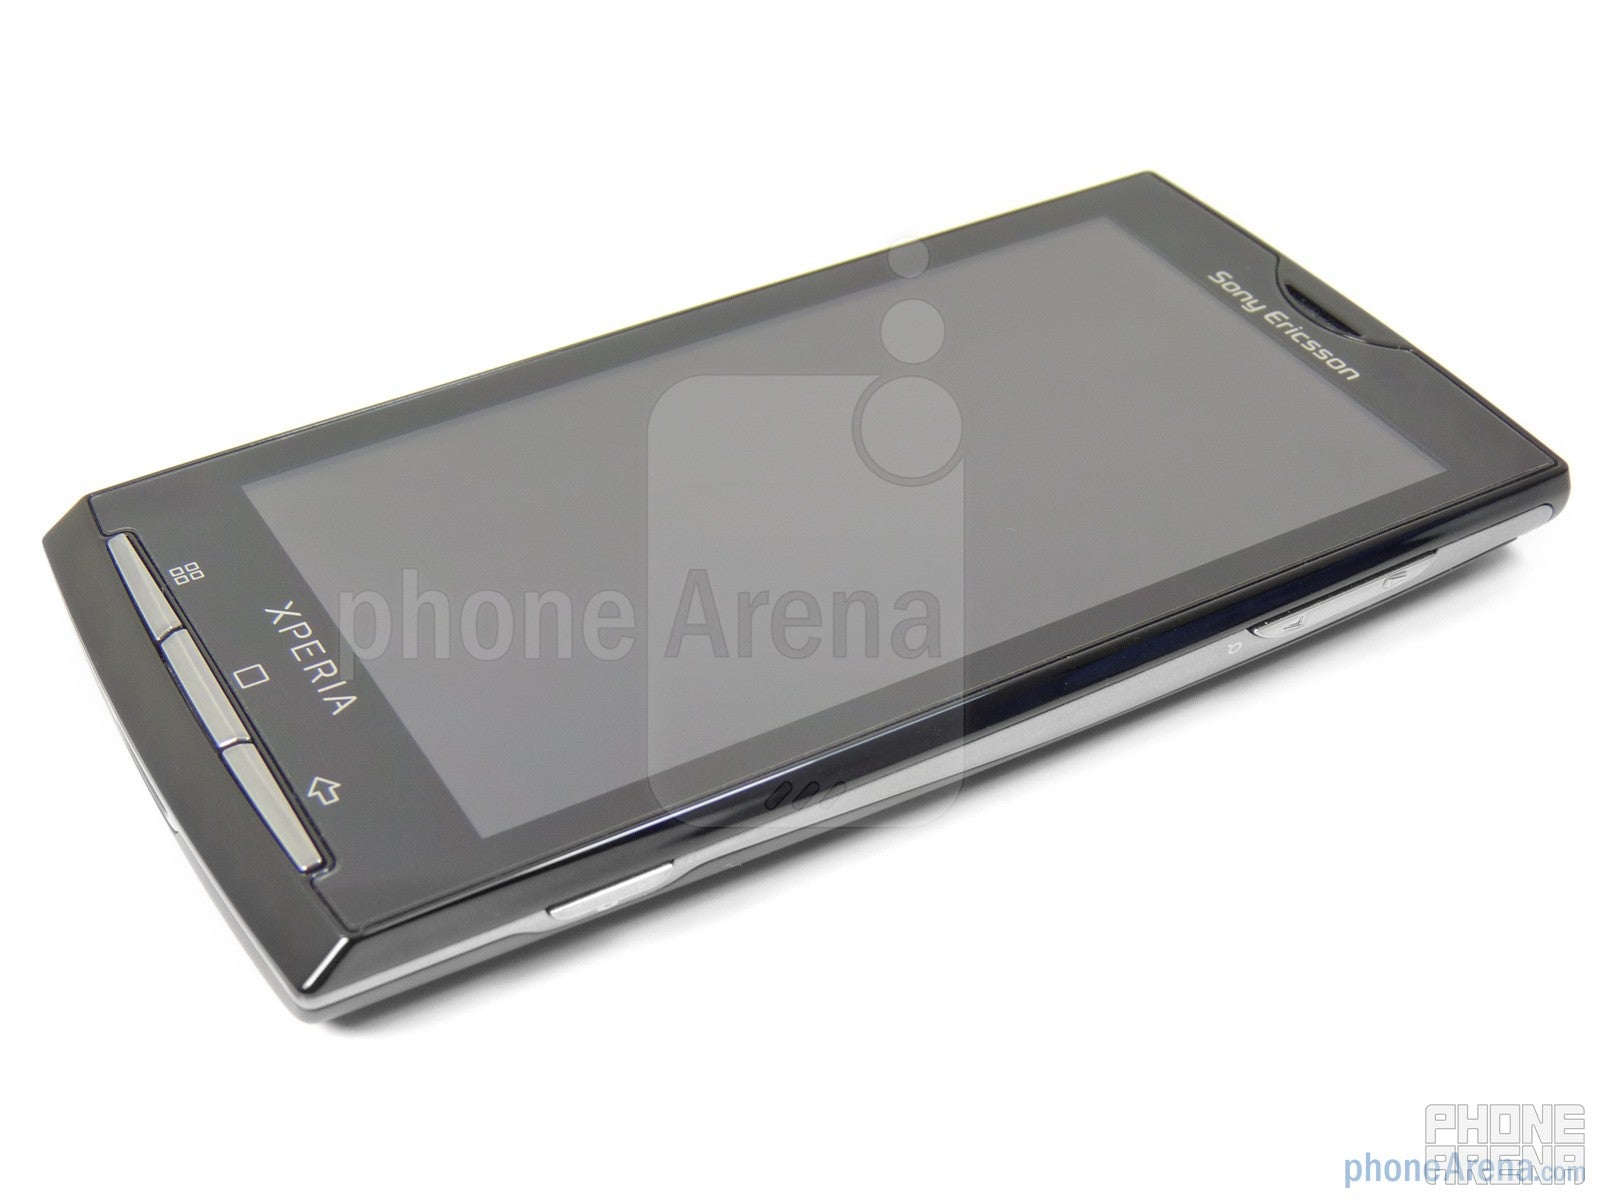 Sony Ericsson Xperia X10a Review